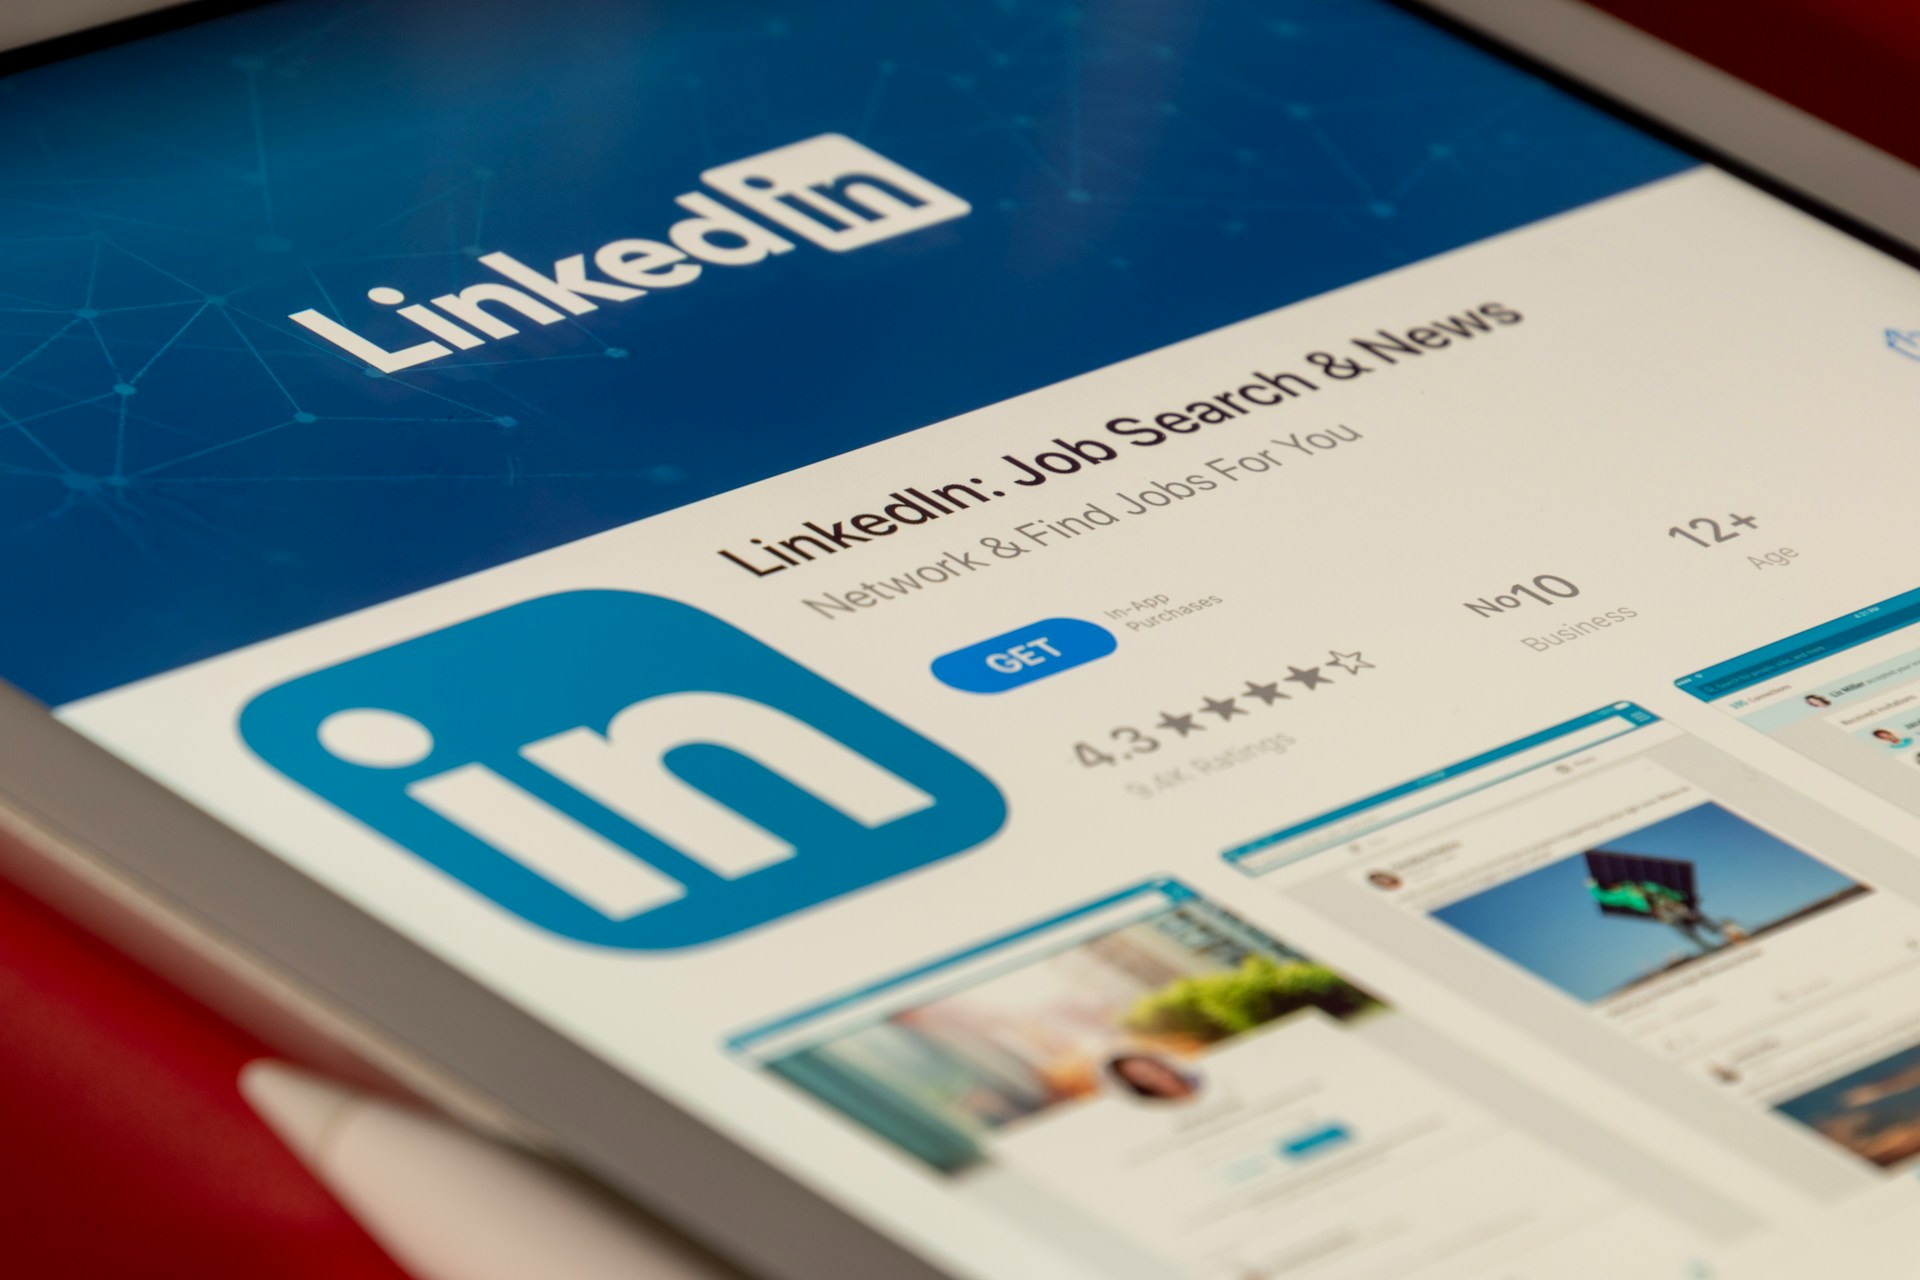 Crafting a Professional LinkedIn Profile Step-by-Step